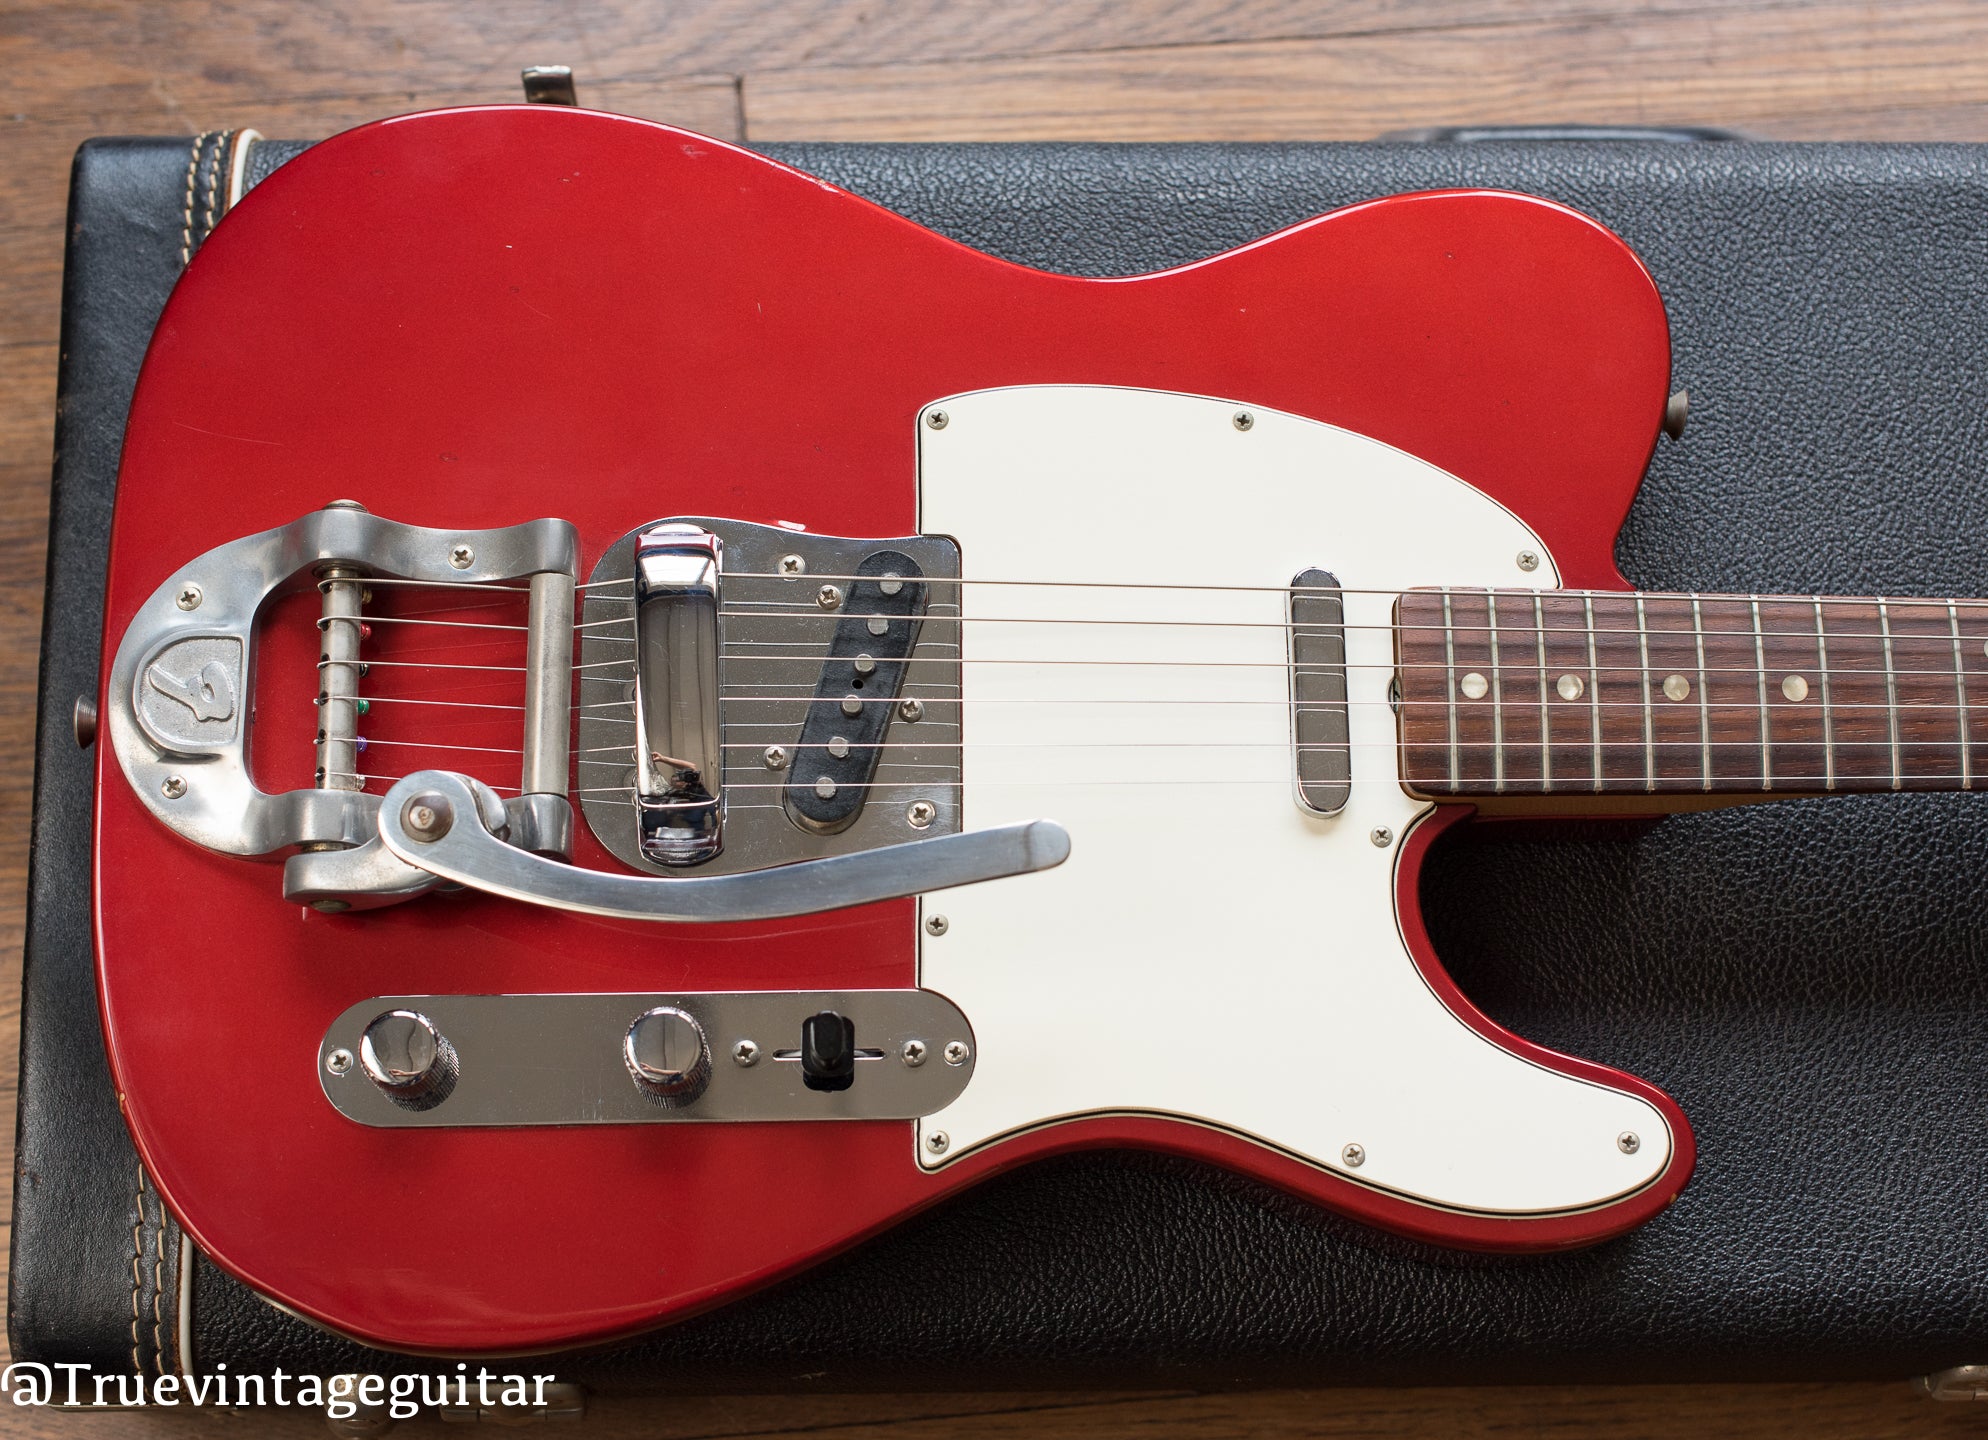 Fender Telecaster 1968 in Candy Apple Red Metallic finish with Bigsby tailpiece